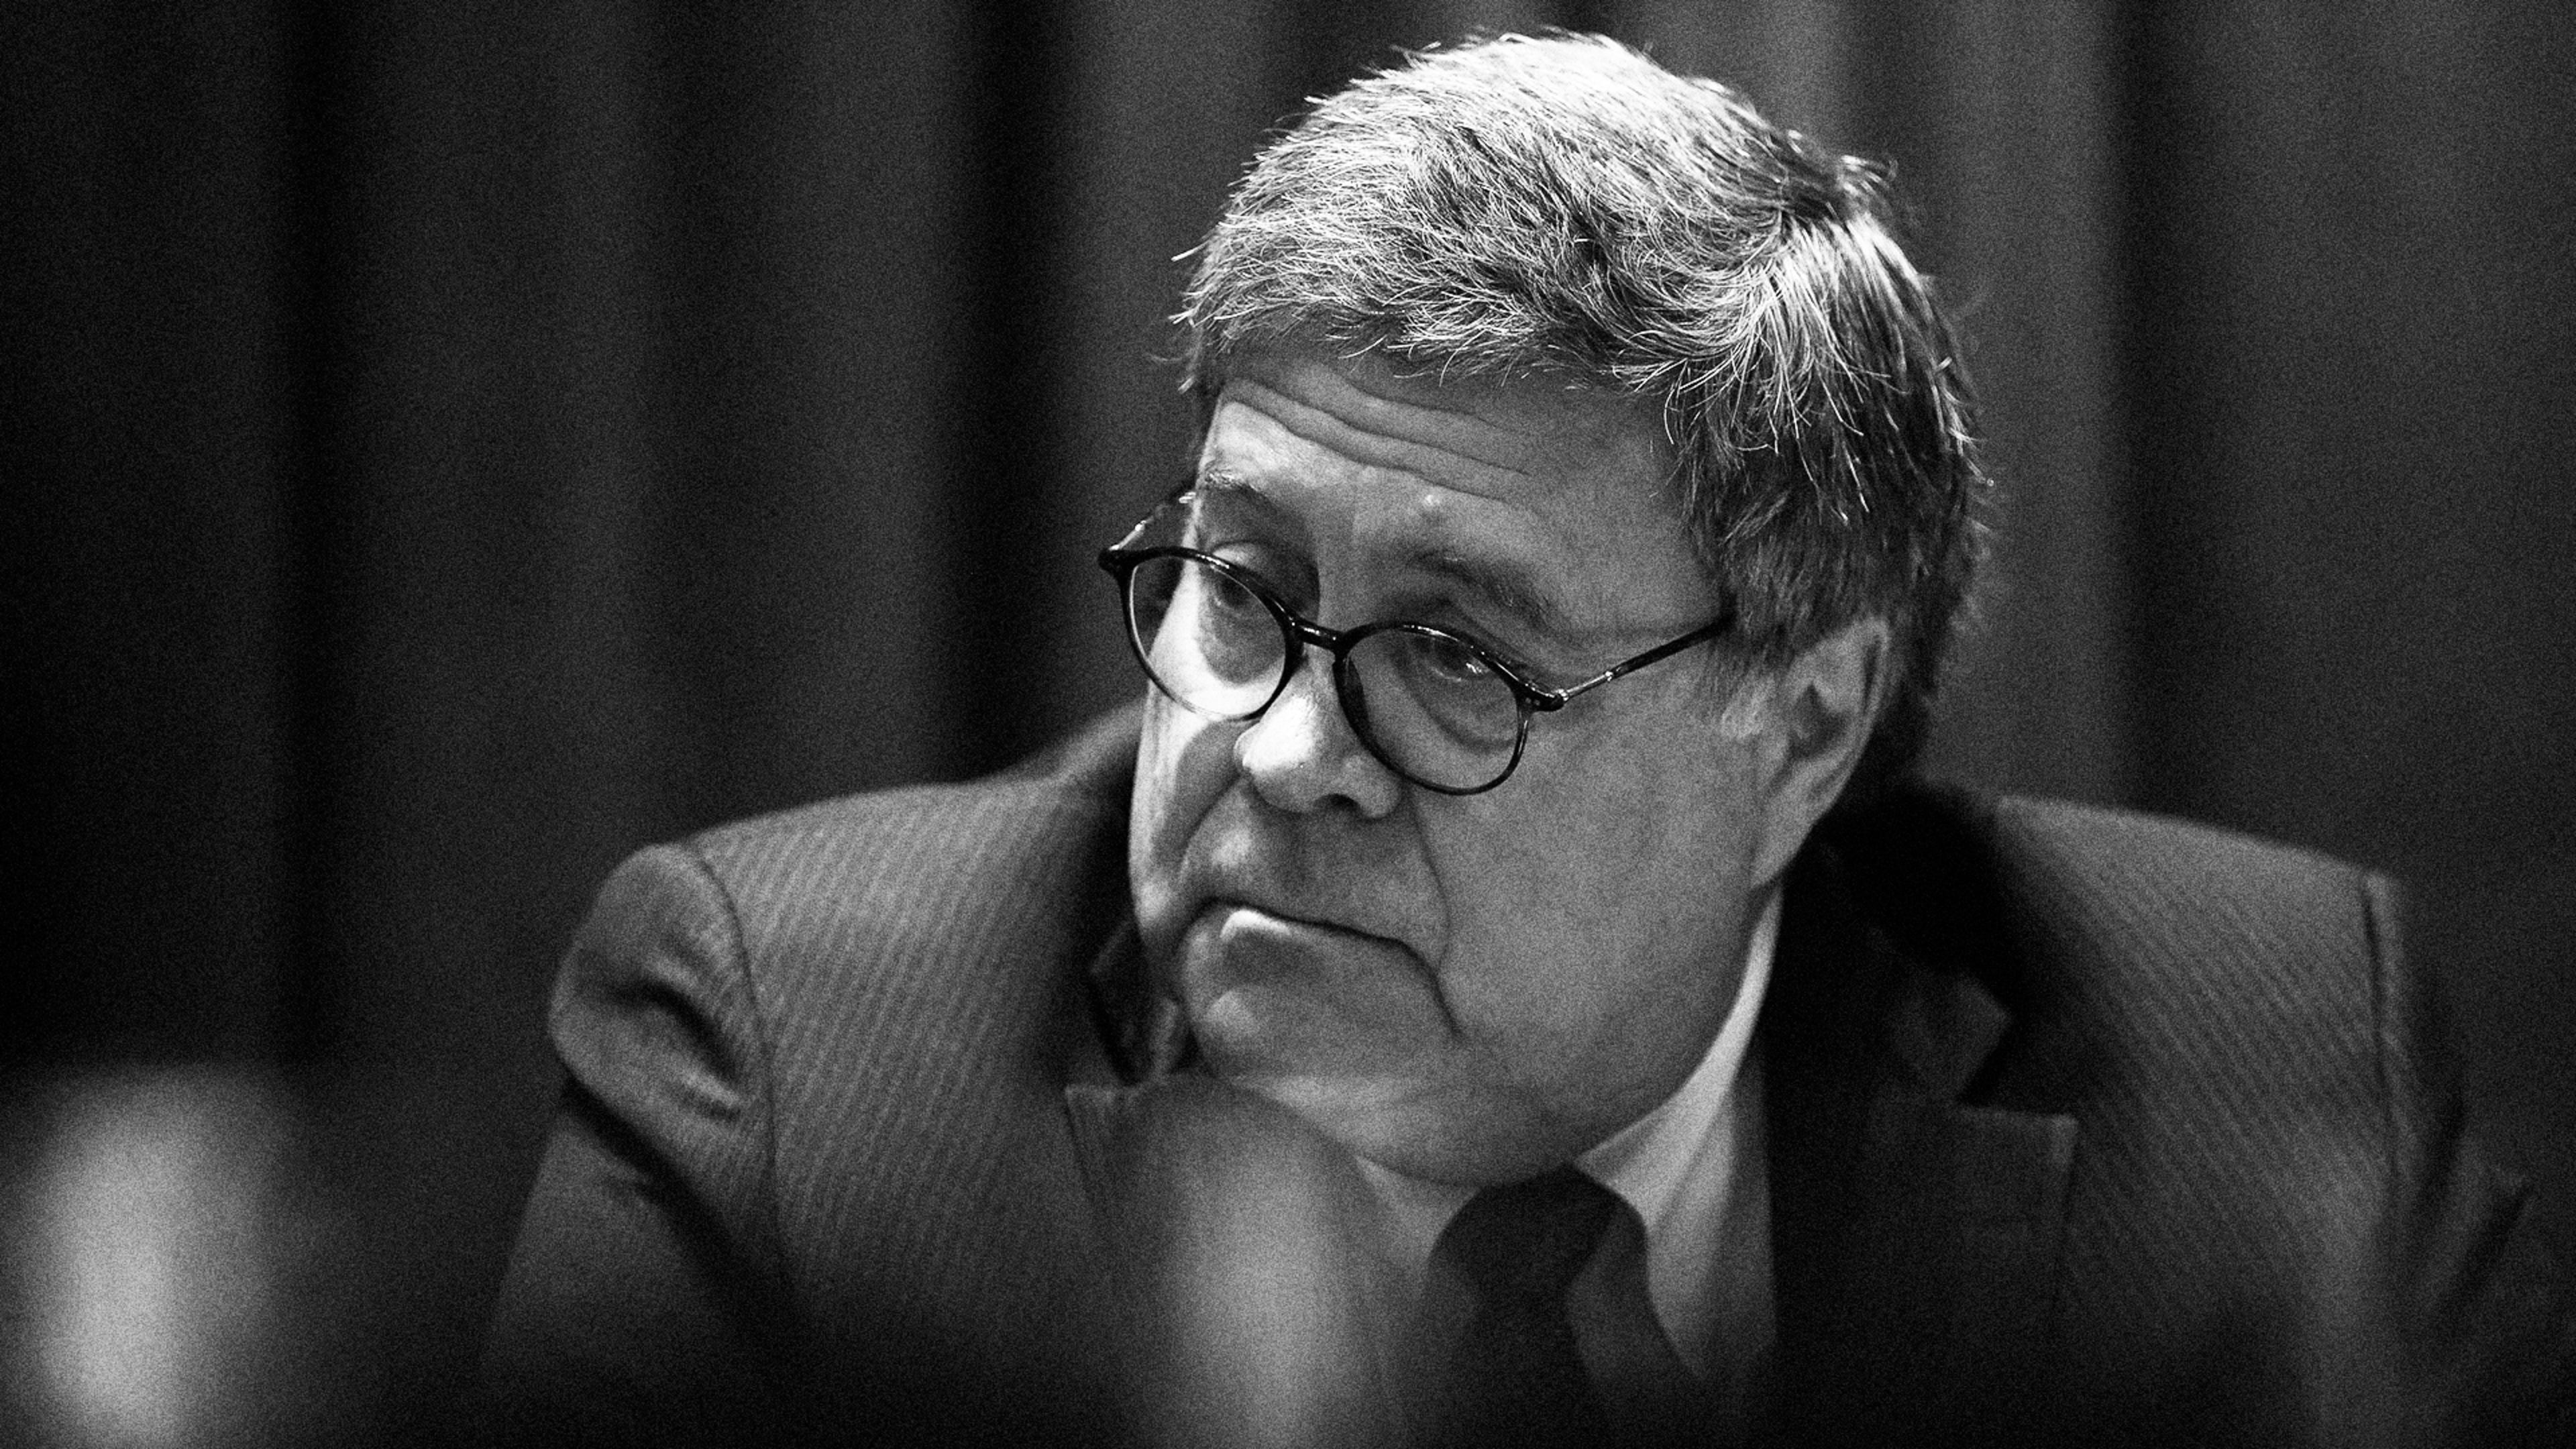 By moving too fast, Bill Barr could screw up his Google antitrust case